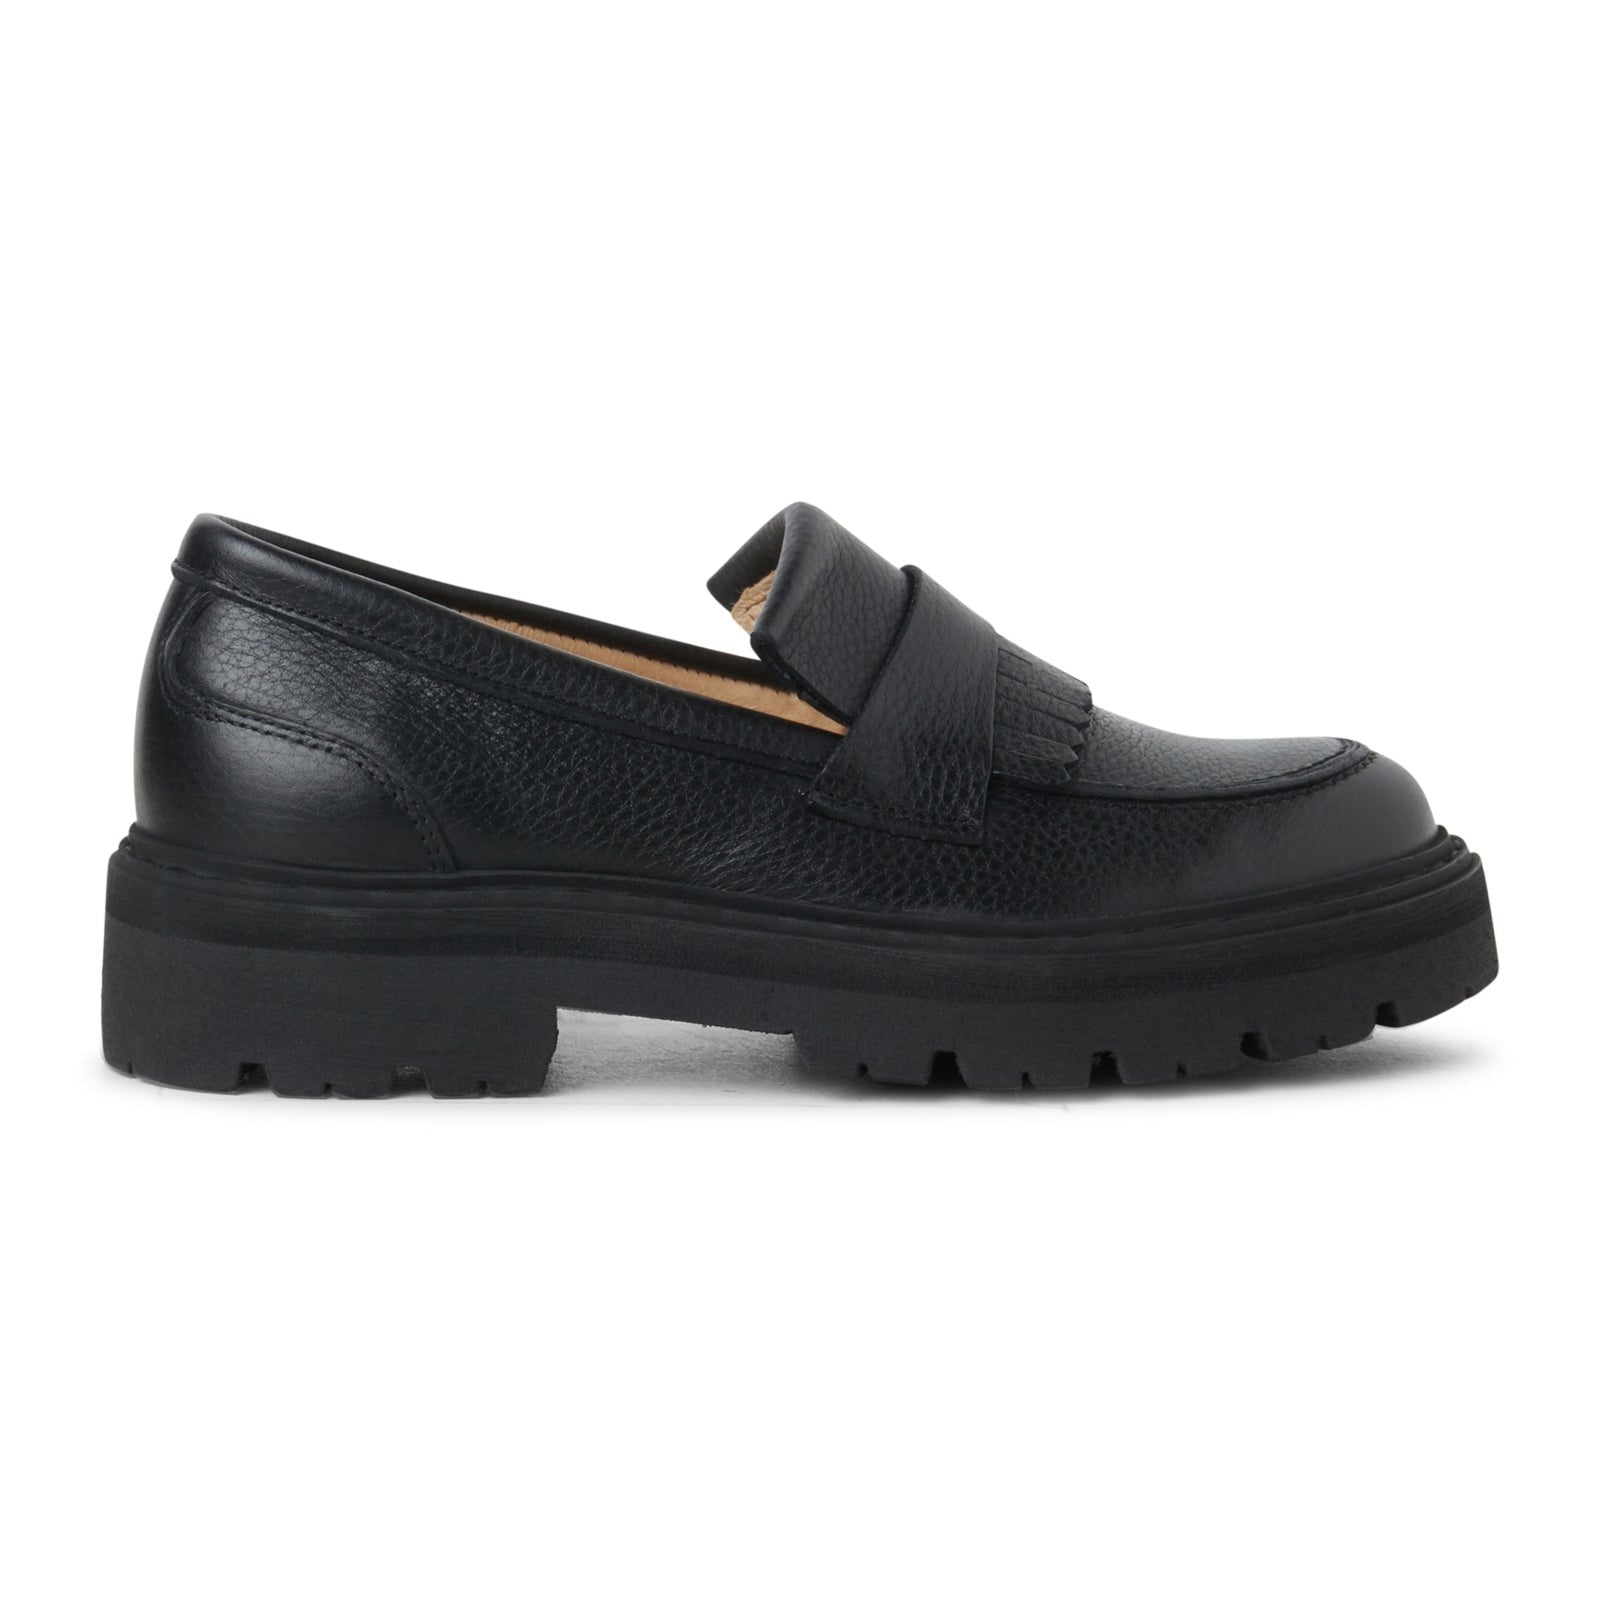 Spike Loafer - Black Grained Leather